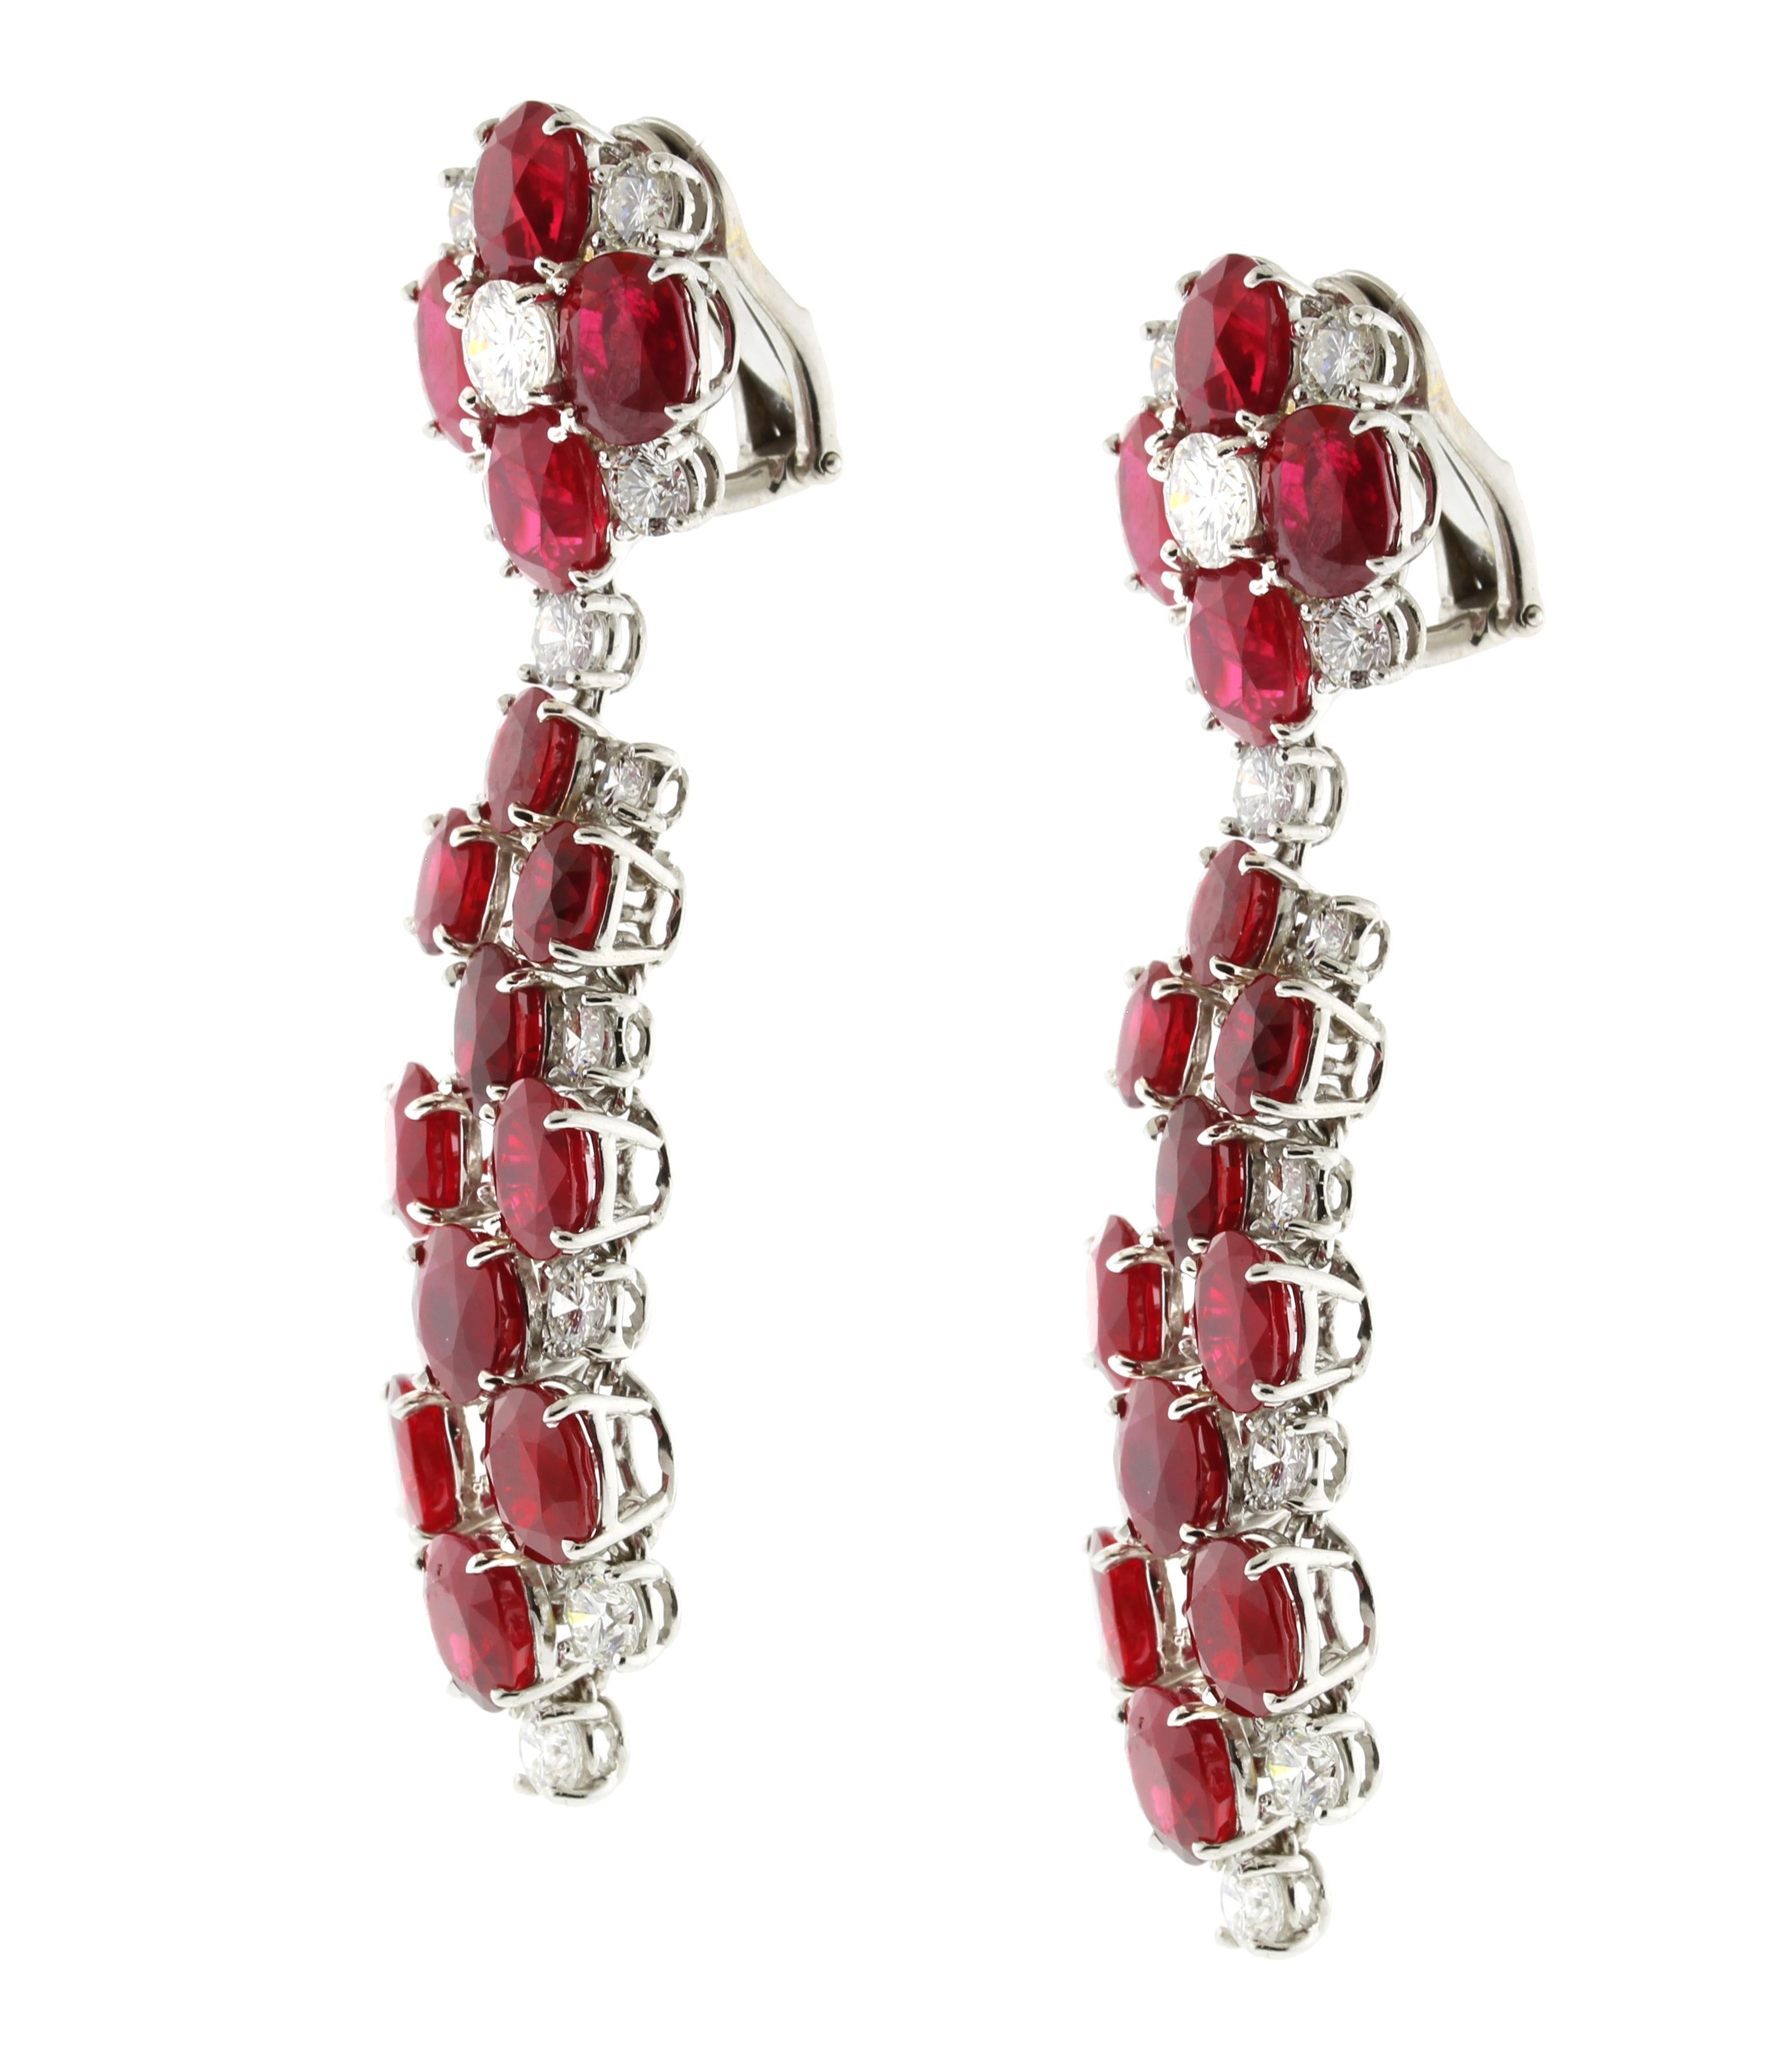 A truly magnificent pair of oval ruby and diamond drop earrings, The earrings are a real show stopper with vivid red rubies and sparkling diamonds. The gems are set in individual settings allowing maximum movement for an uncompromised scintillation.